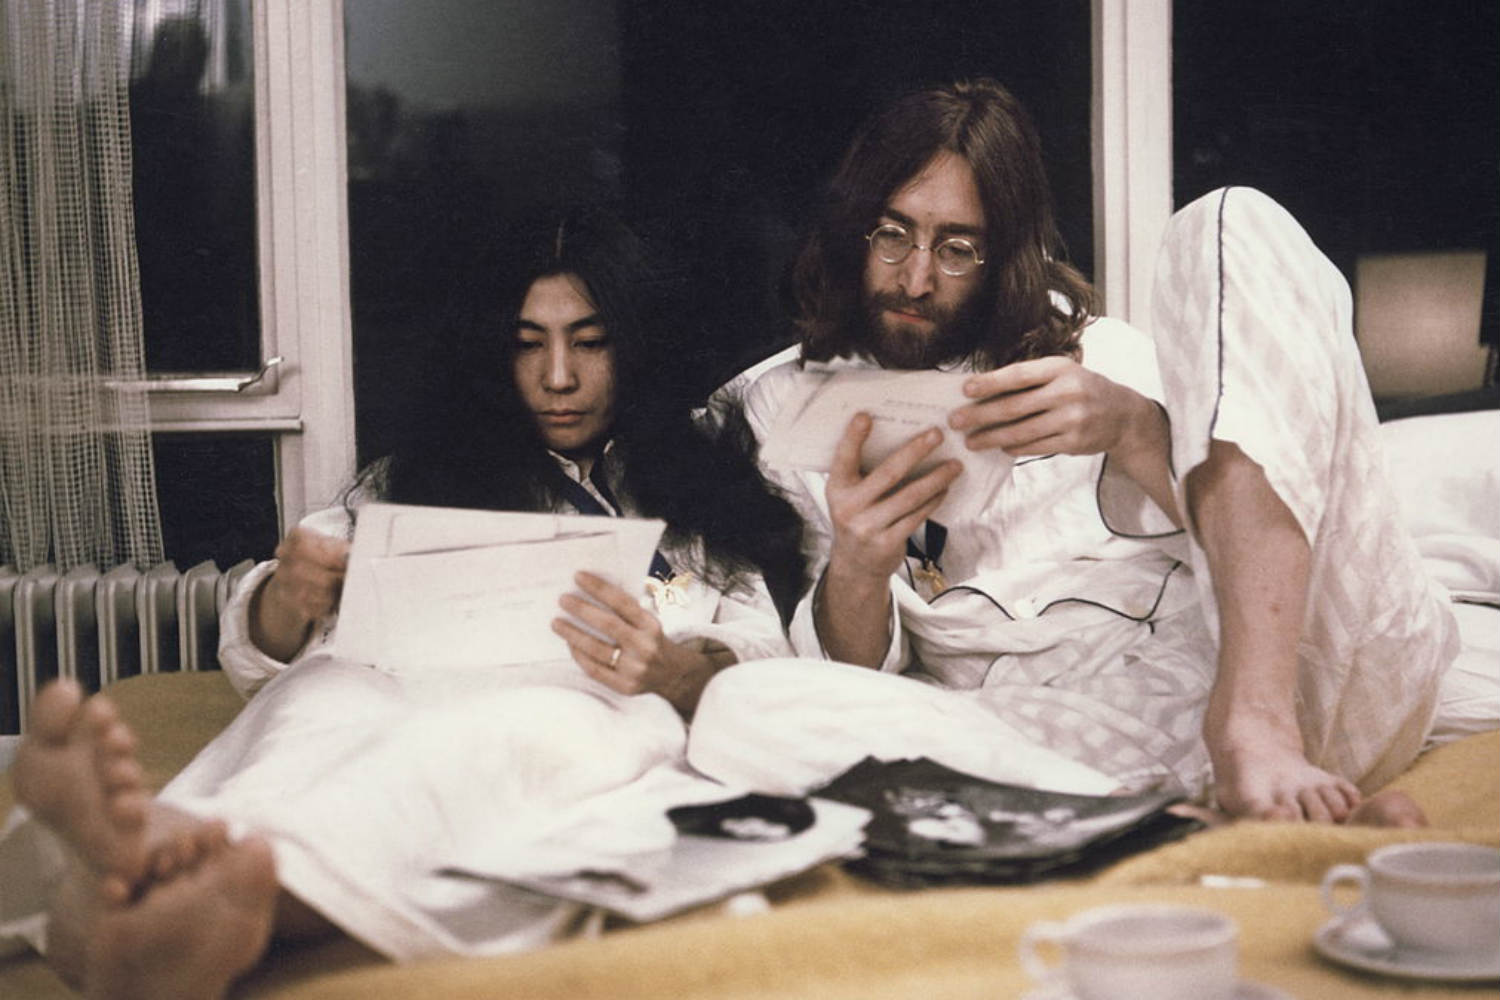 John Lennon and Yoko Onos Love Story Of Five Decades Sound of Life Powered by image